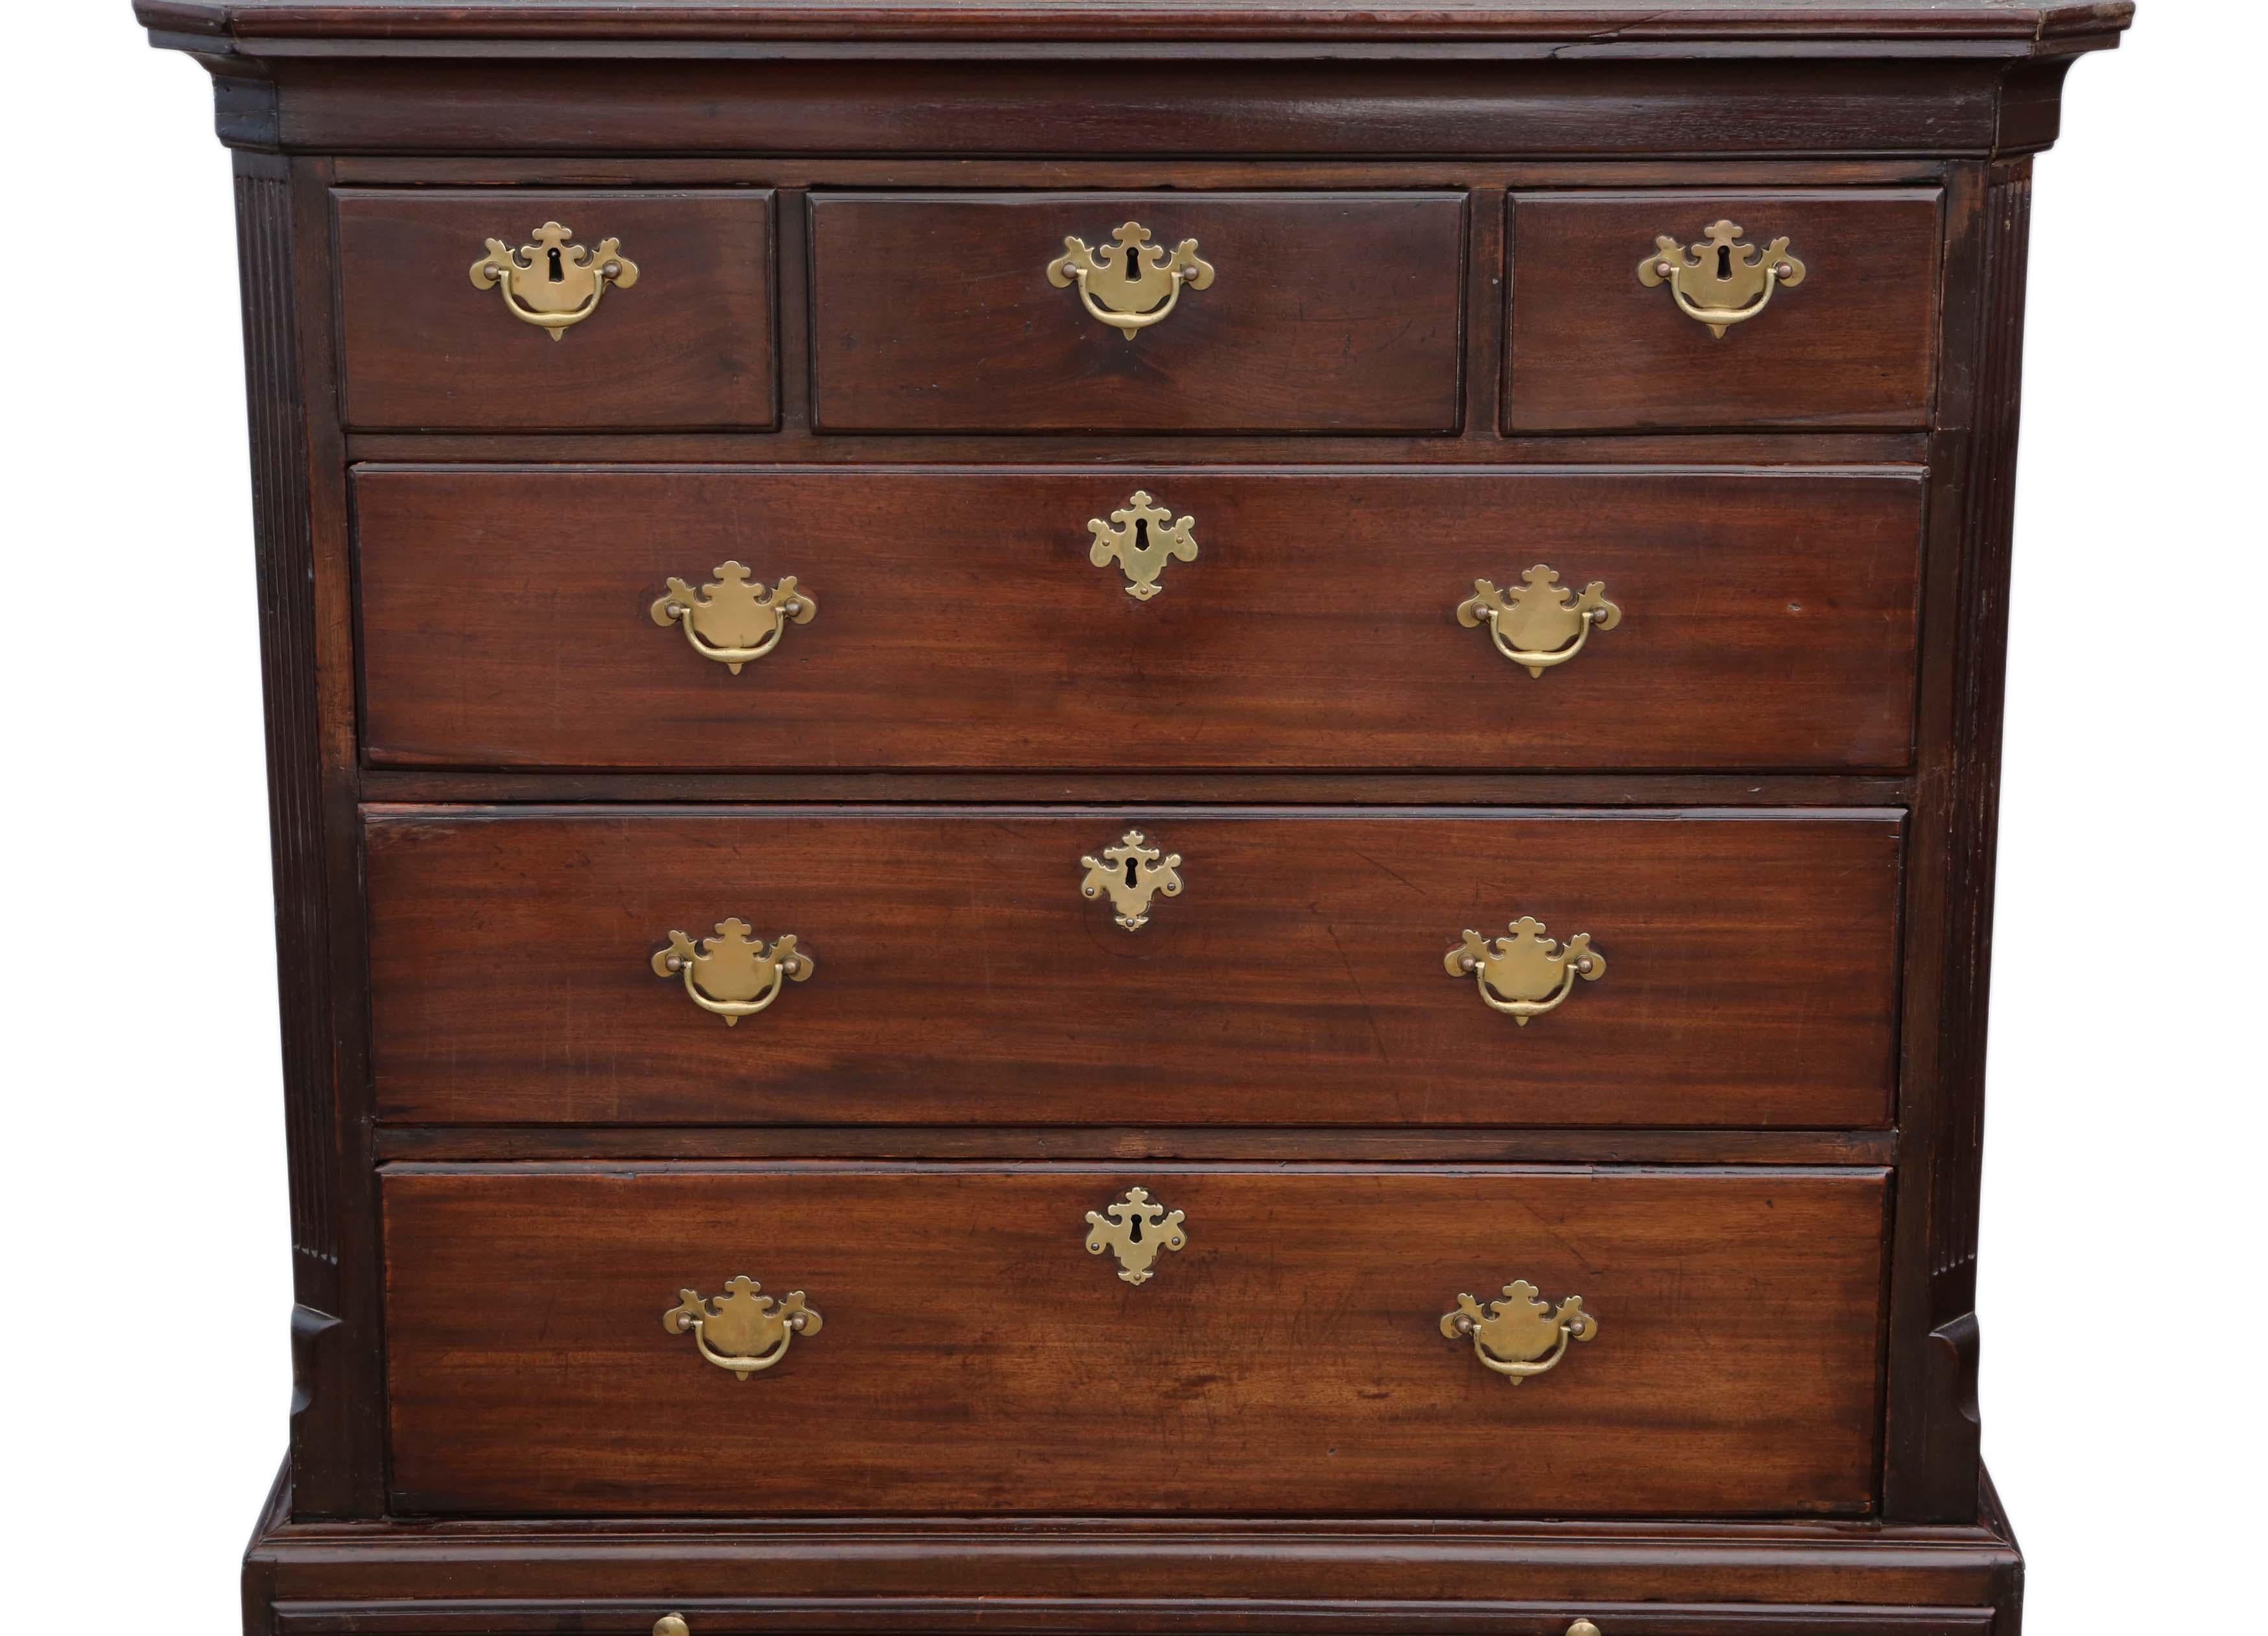 Late 18th Century Georgian Tallboy Mahogany Chest on Chest of Drawers